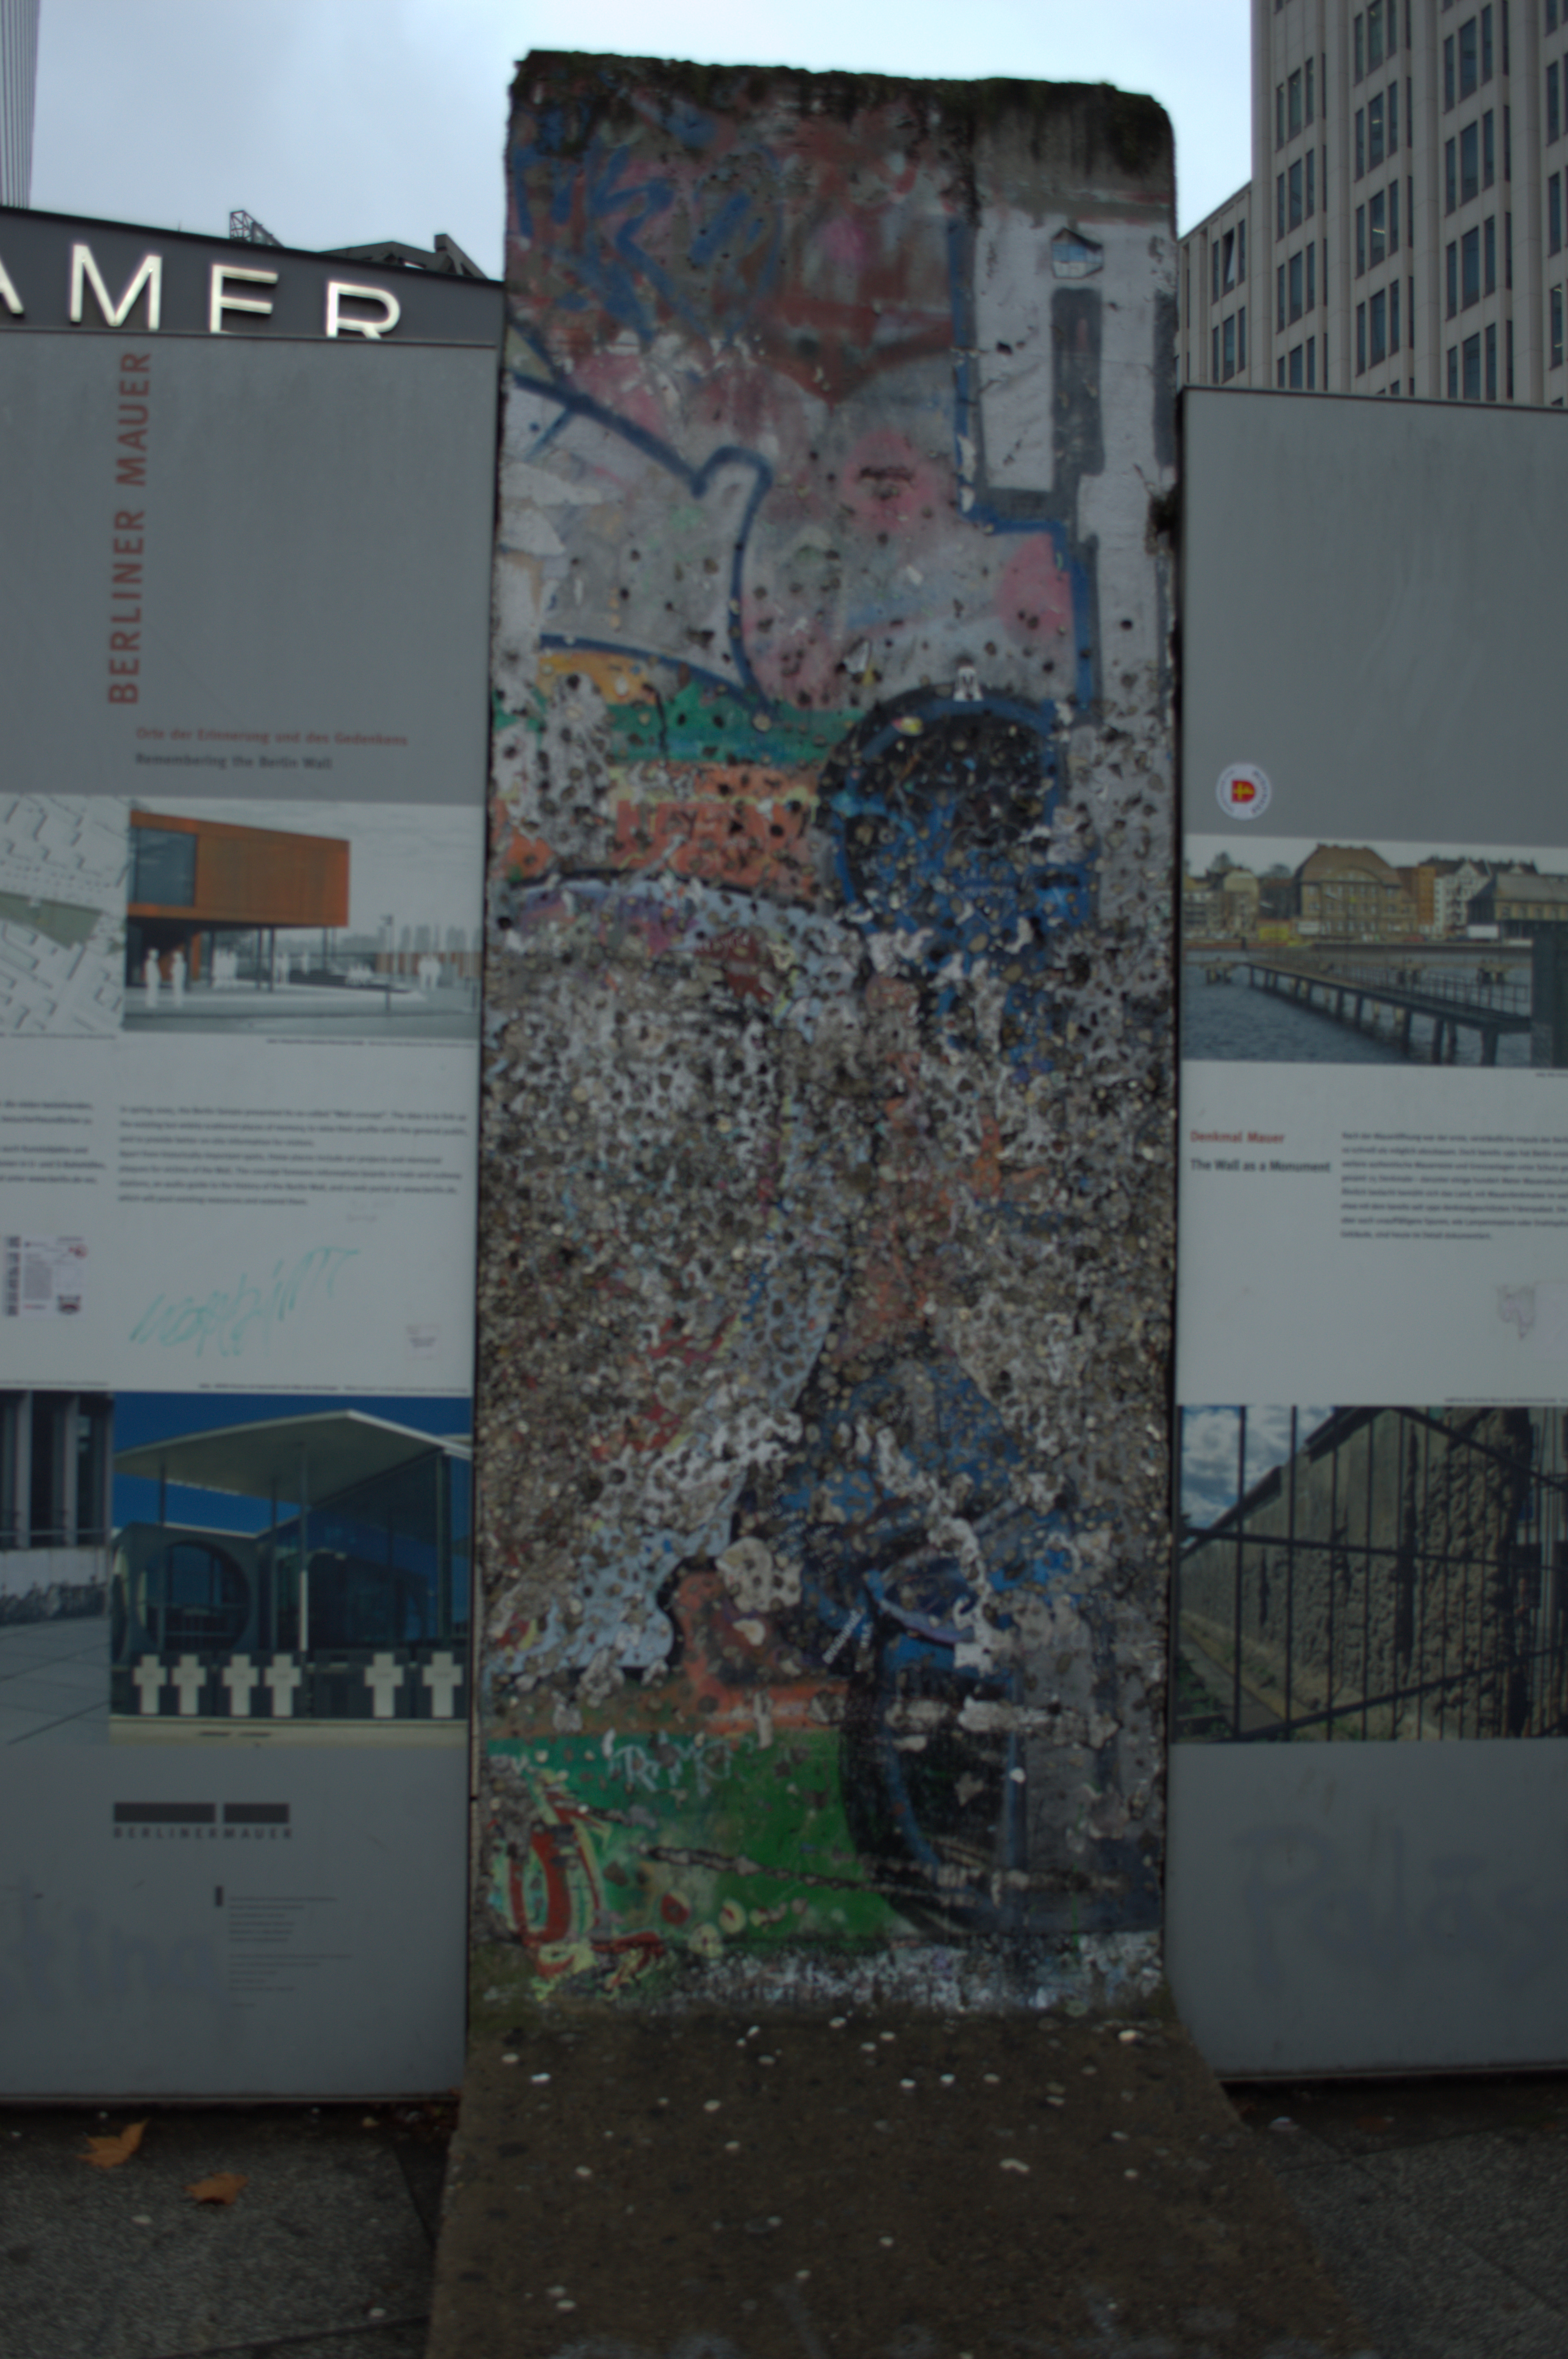 Photo of another piece of the Berlin Wall showing how weathered it is.